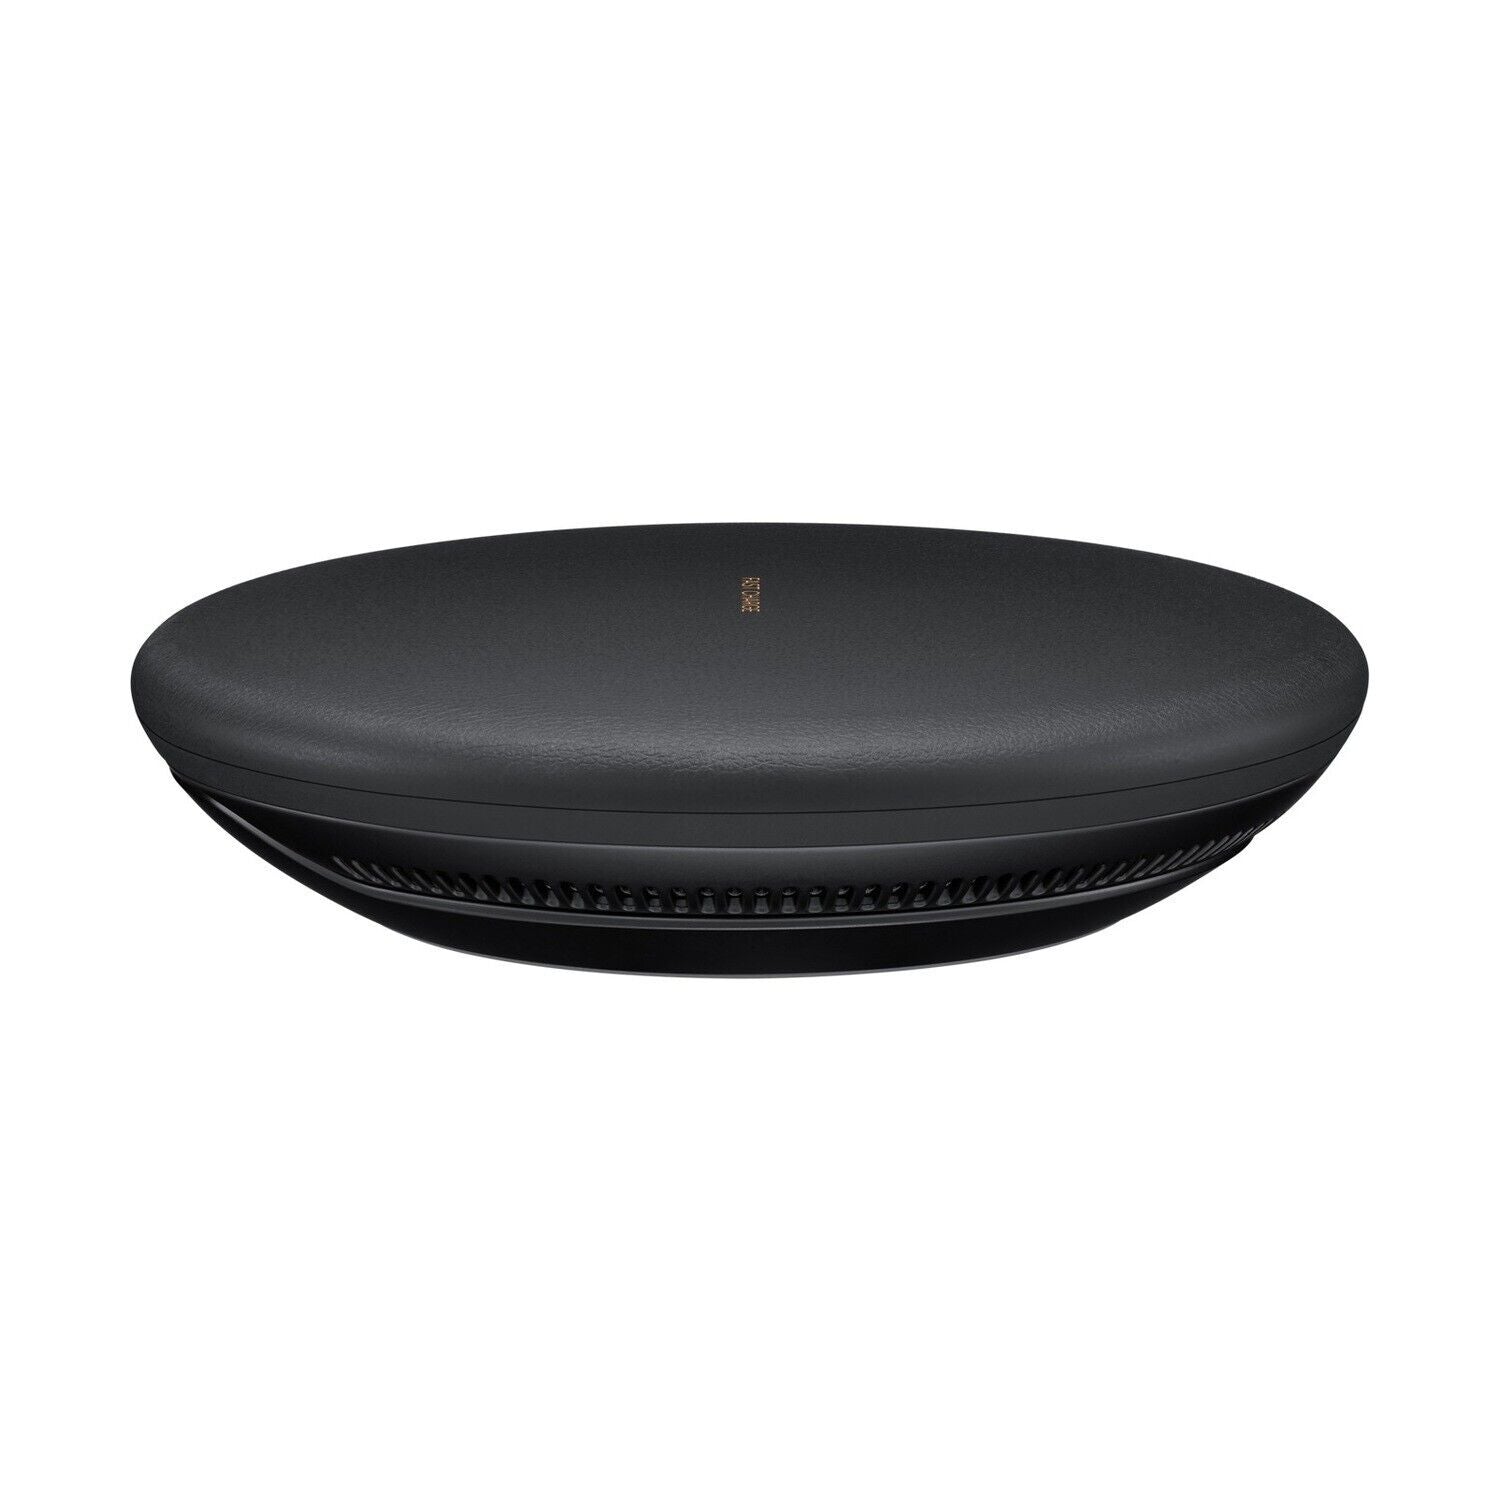 Samsung EP-N5100TBEGUS Fast Wireless Charger Stand, Black